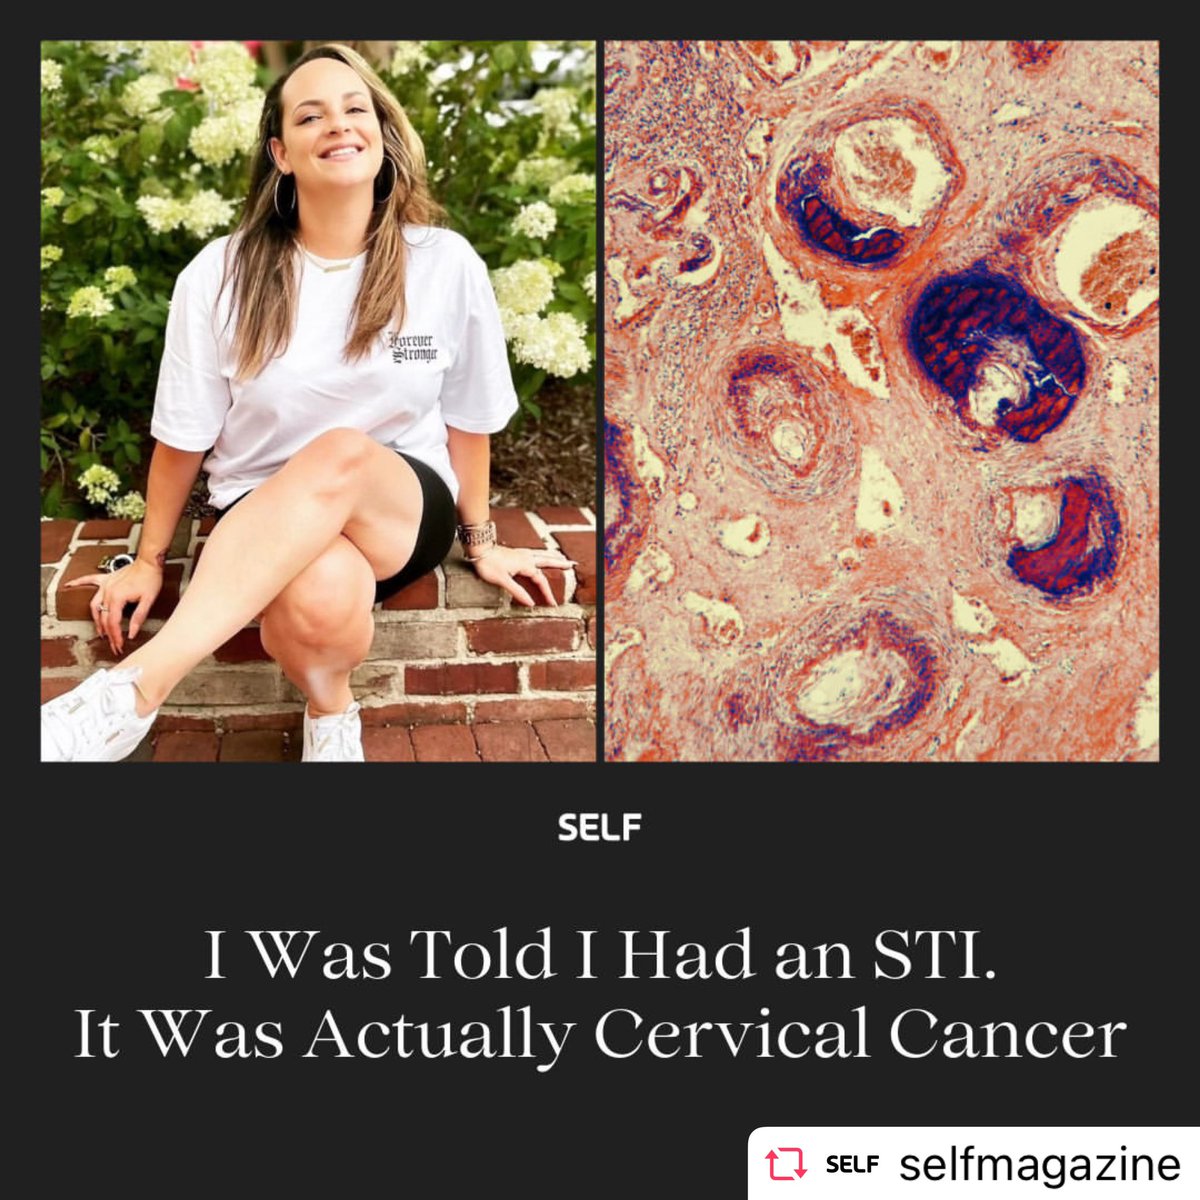 Shoutout to @AishaMcClellan_ feature in Self Mag! Our Cervical Cancer Program Coordinator shares her challenges navigating cervical cancer amidst motherhood, misdiagnosis, and self-advocacy. 📱 Follow her story here: bit.ly/3QLshKX #CervicalCancerAdvocate #gyncsm